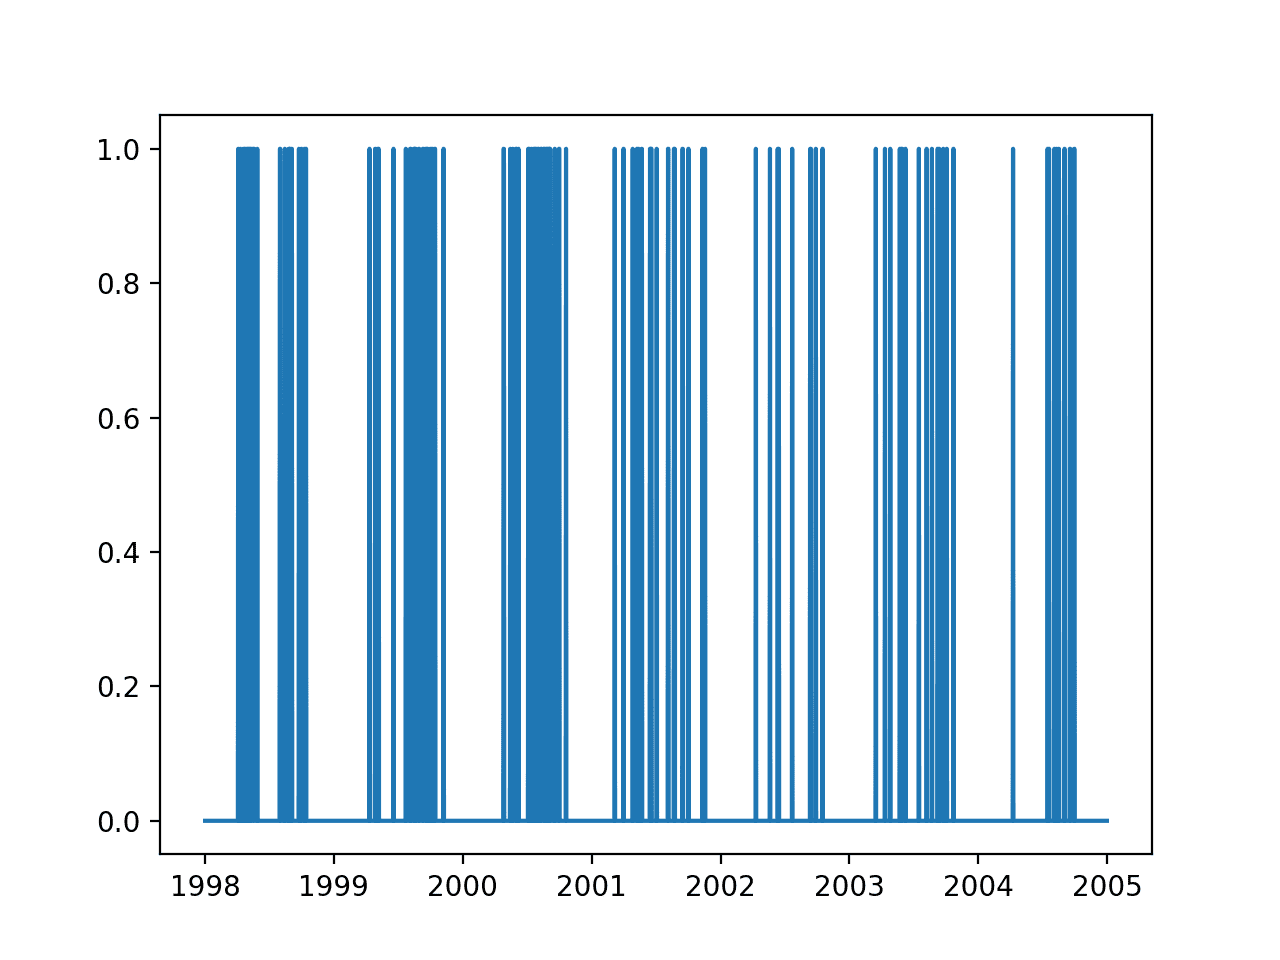 Line plot of output variable over 7 years